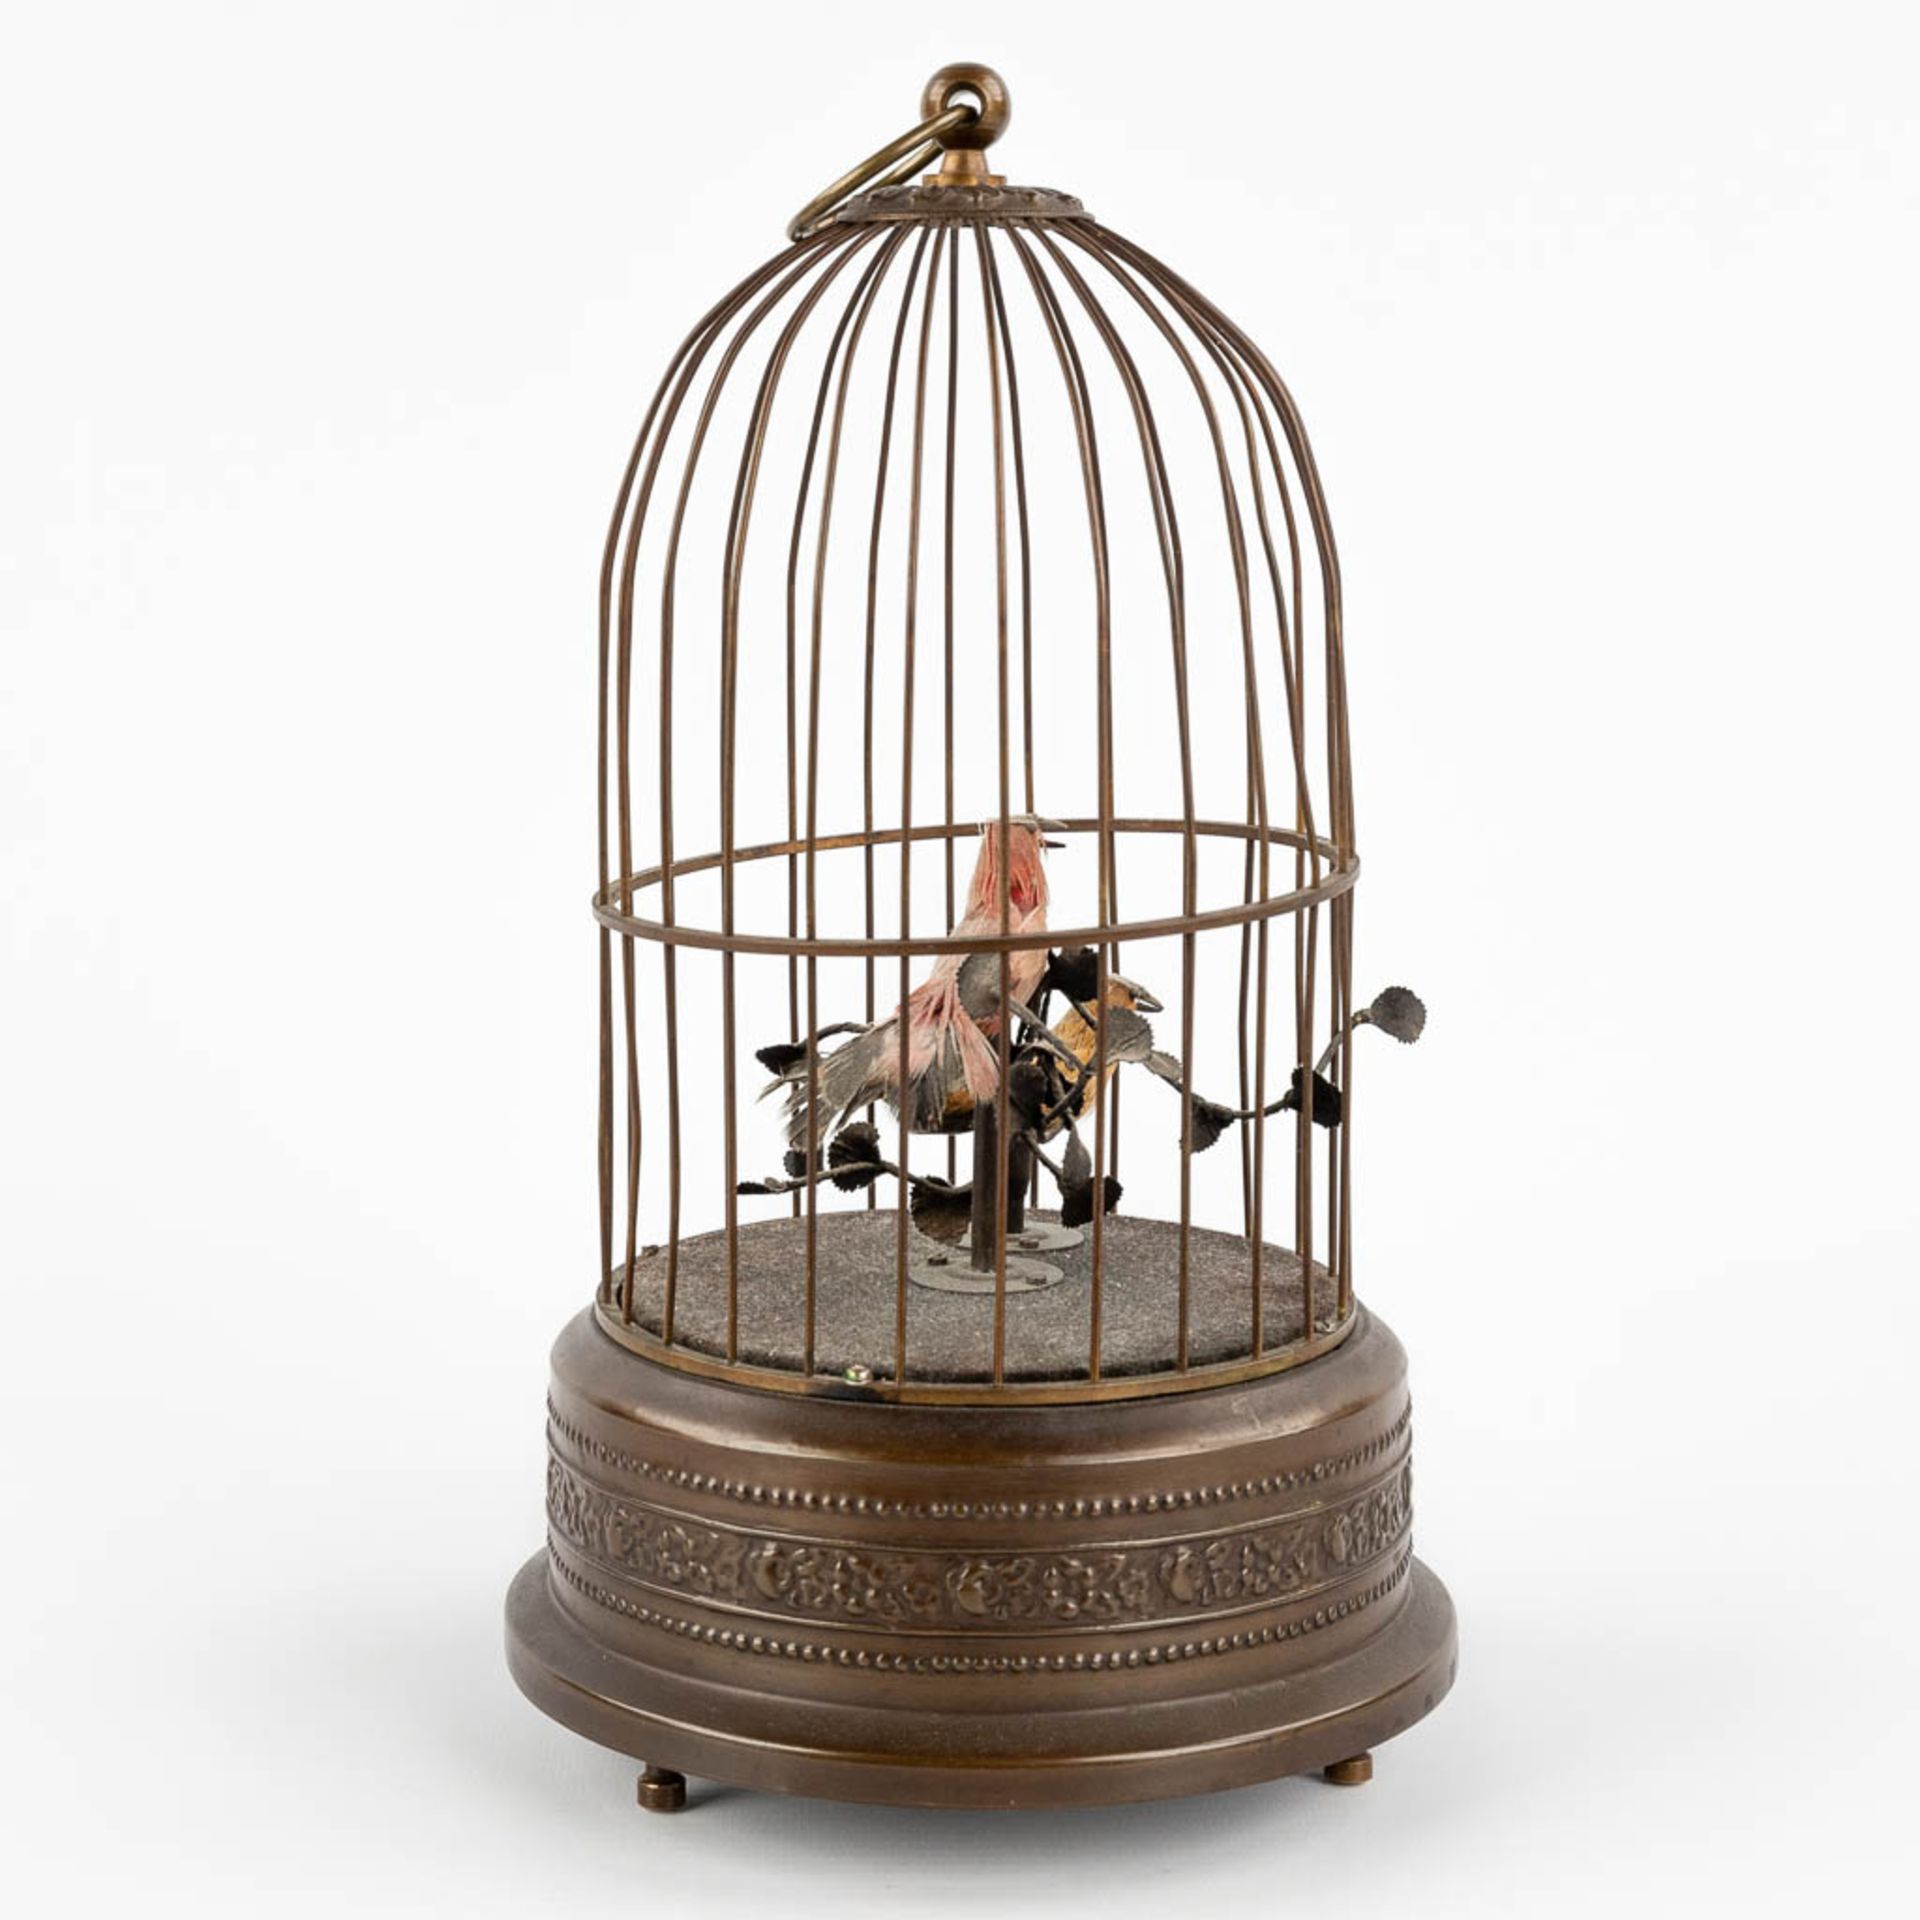 A bird cage automata with a music box. (H:28 x D:15,5 cm) - Image 4 of 12